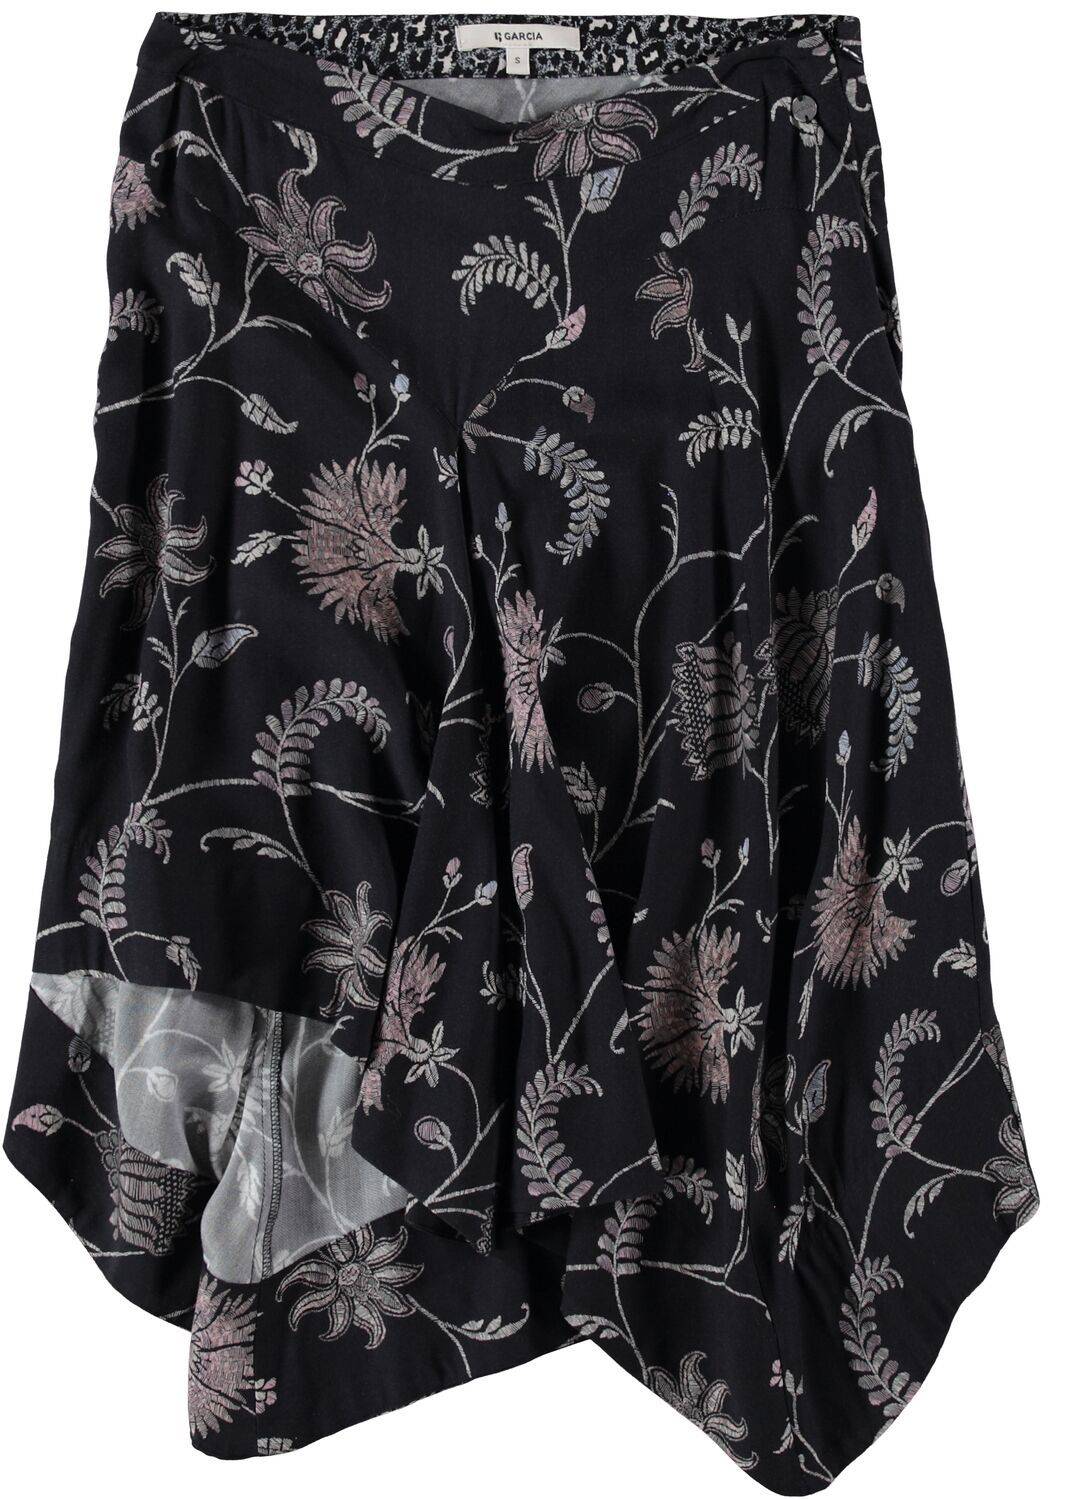 Asymmetrical Black Garcia Skirt with Allover Print - Your Style Your Story